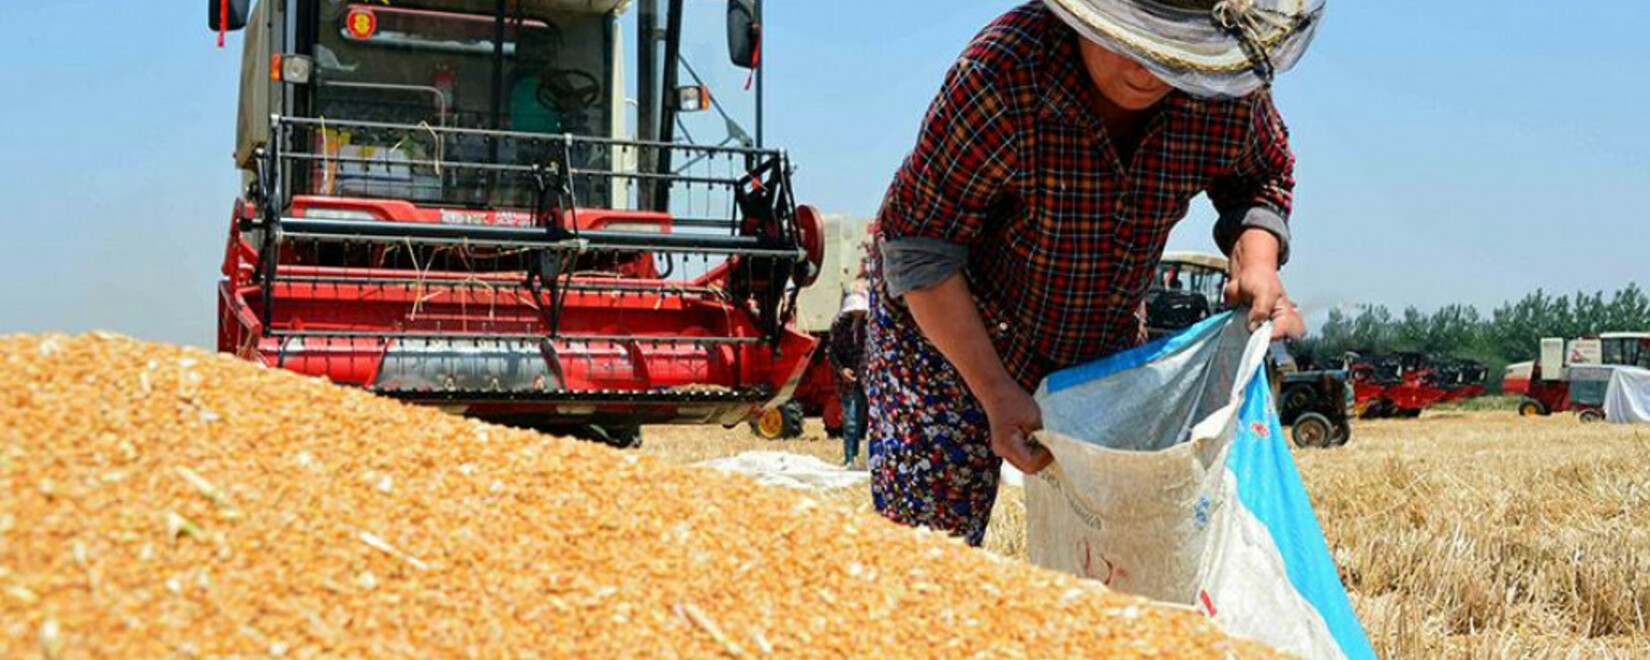 Rosselkhoznadzor announced China's readiness to open the market for Russian grain